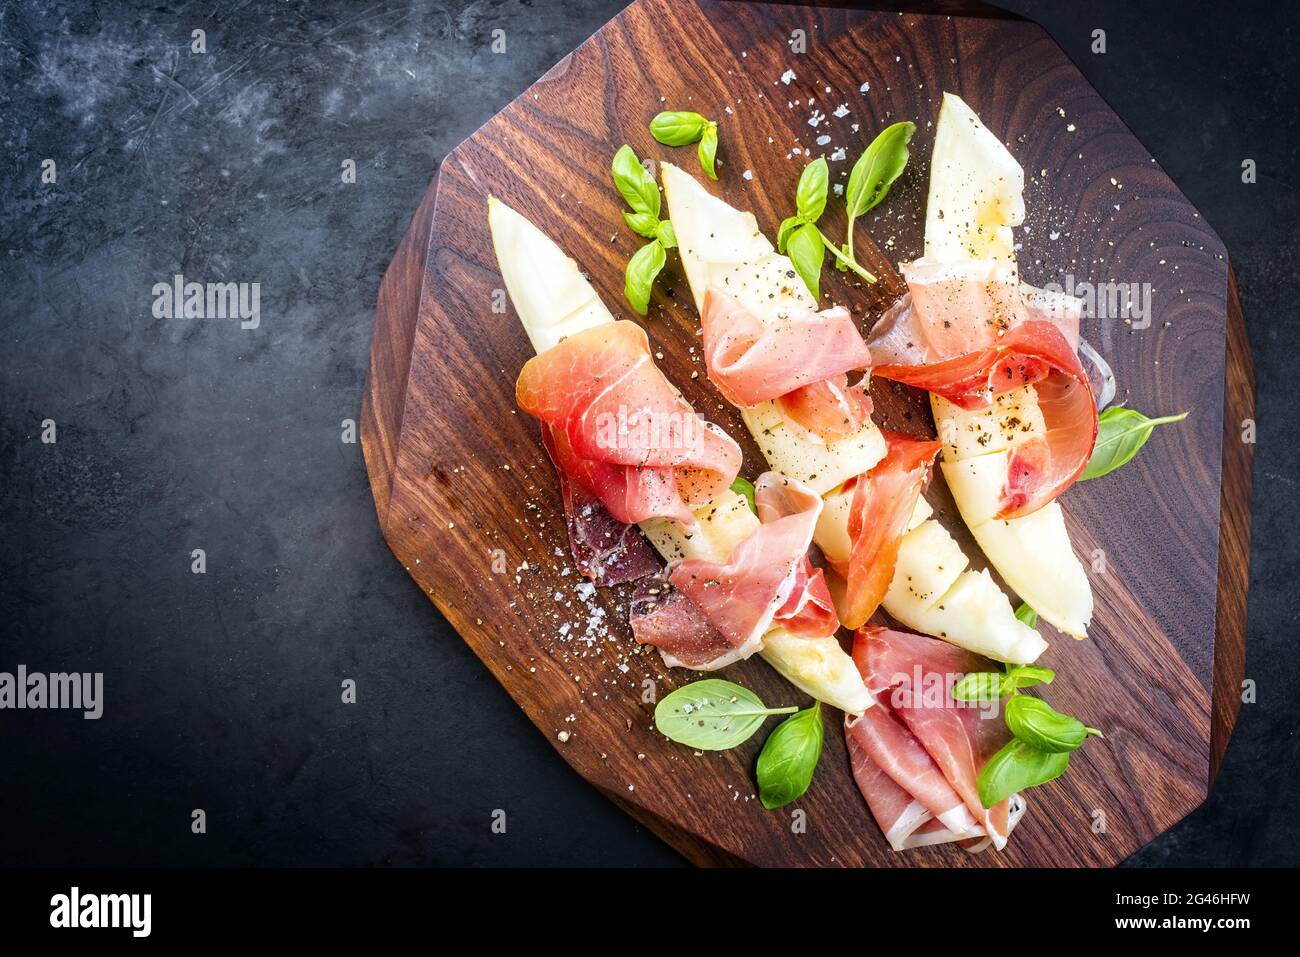 melon board prosciutto on with wooden Photo view design di slices Italian as offered Parma Traditional Alamy a top - wi and Stock antipasti honeydew